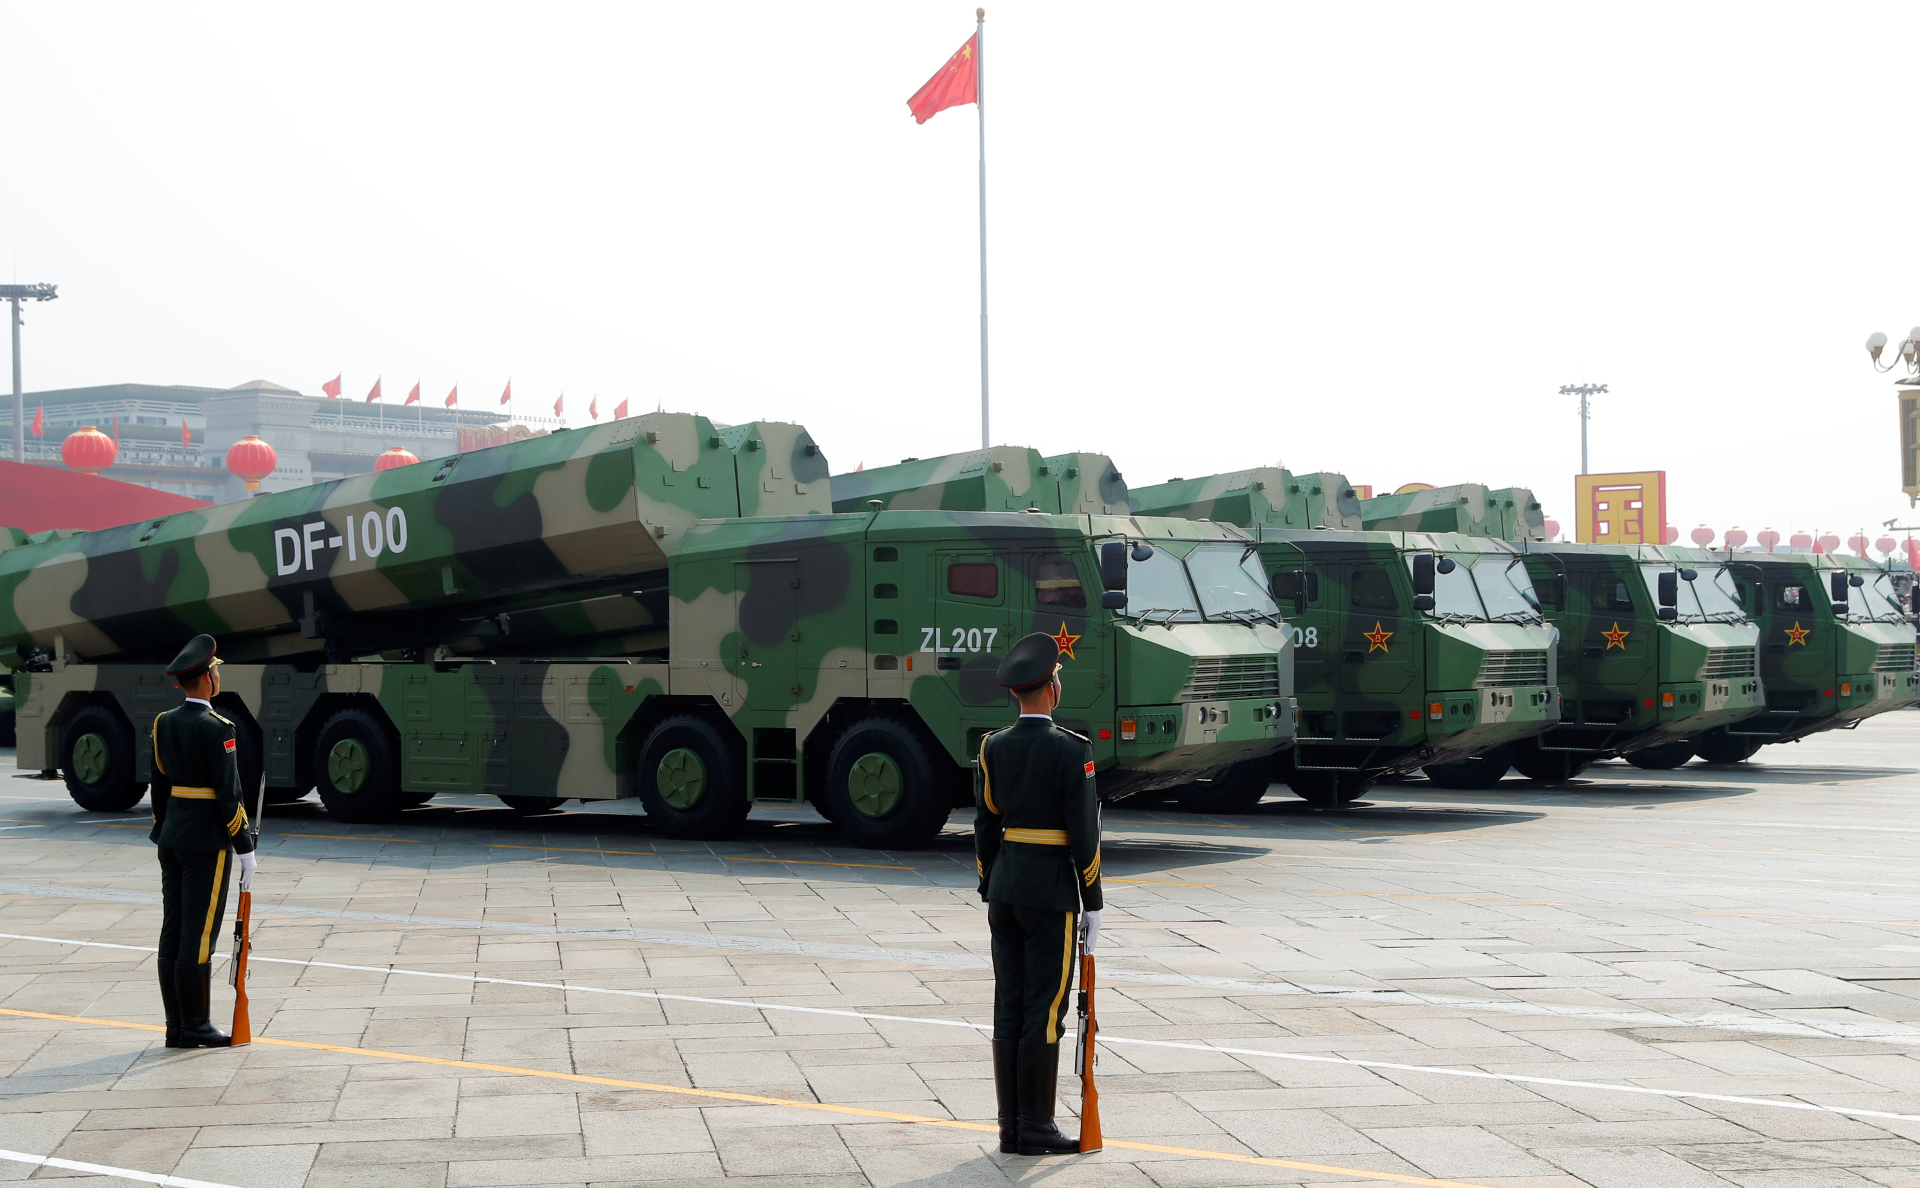 DF-100 hypersonic cruise missiles during a military parade to celebrate the 70th anniversary of the founding of China in Beijing.  1 October 2019